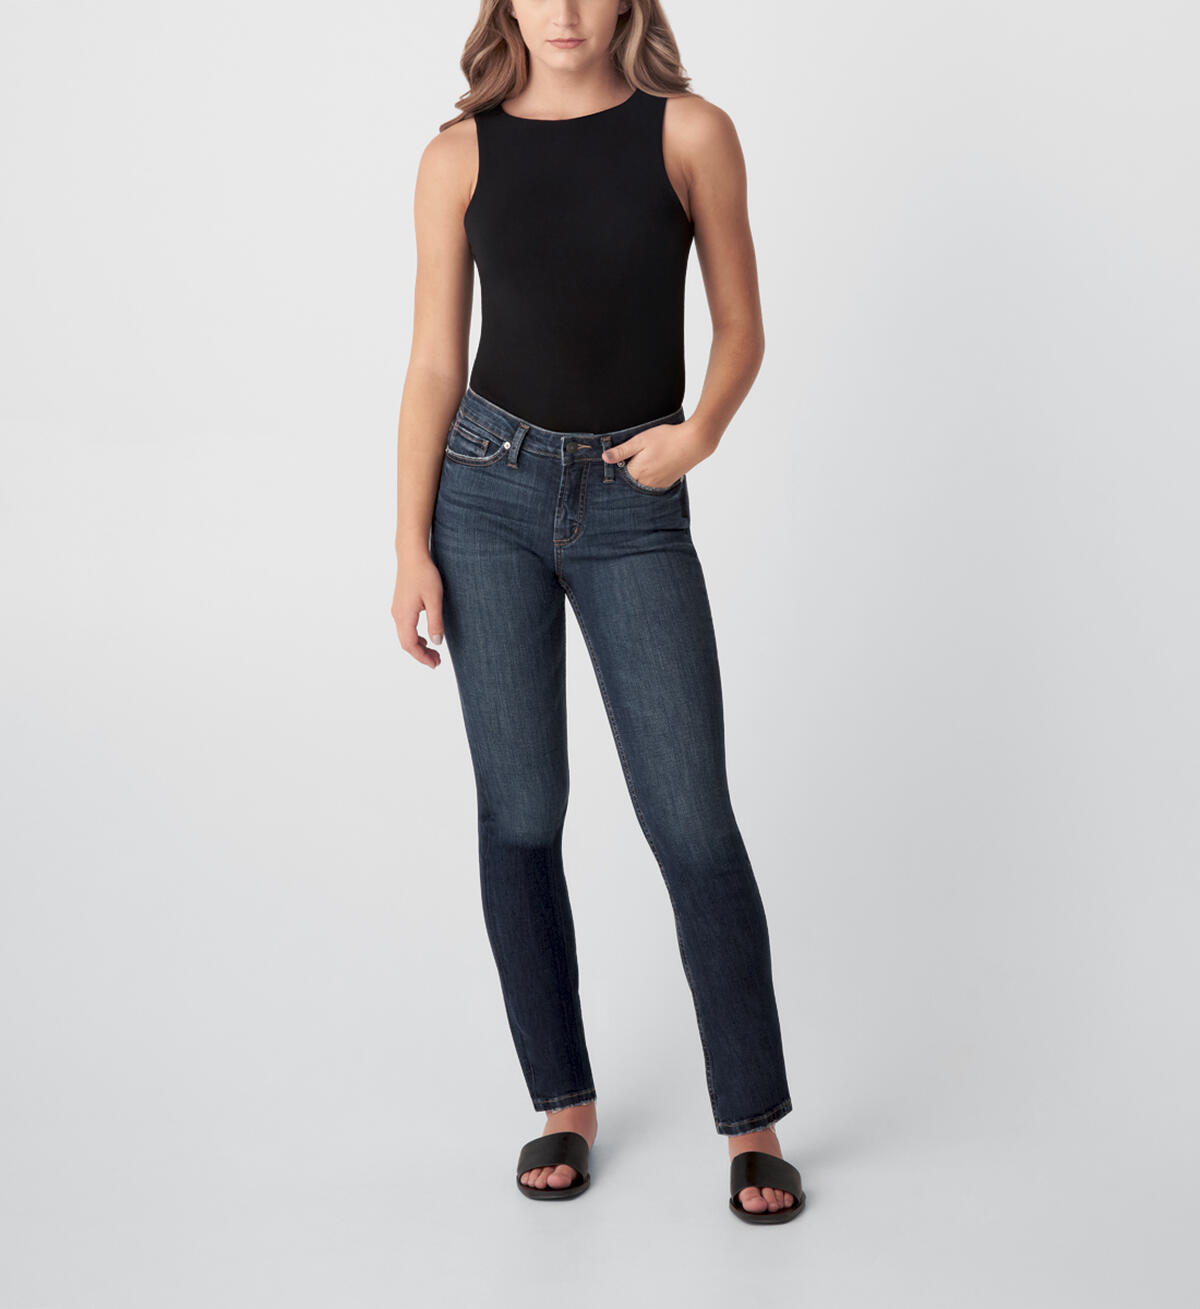 Most Wanted Mid Rise Straight Leg Jeans, , hi-res image number 0